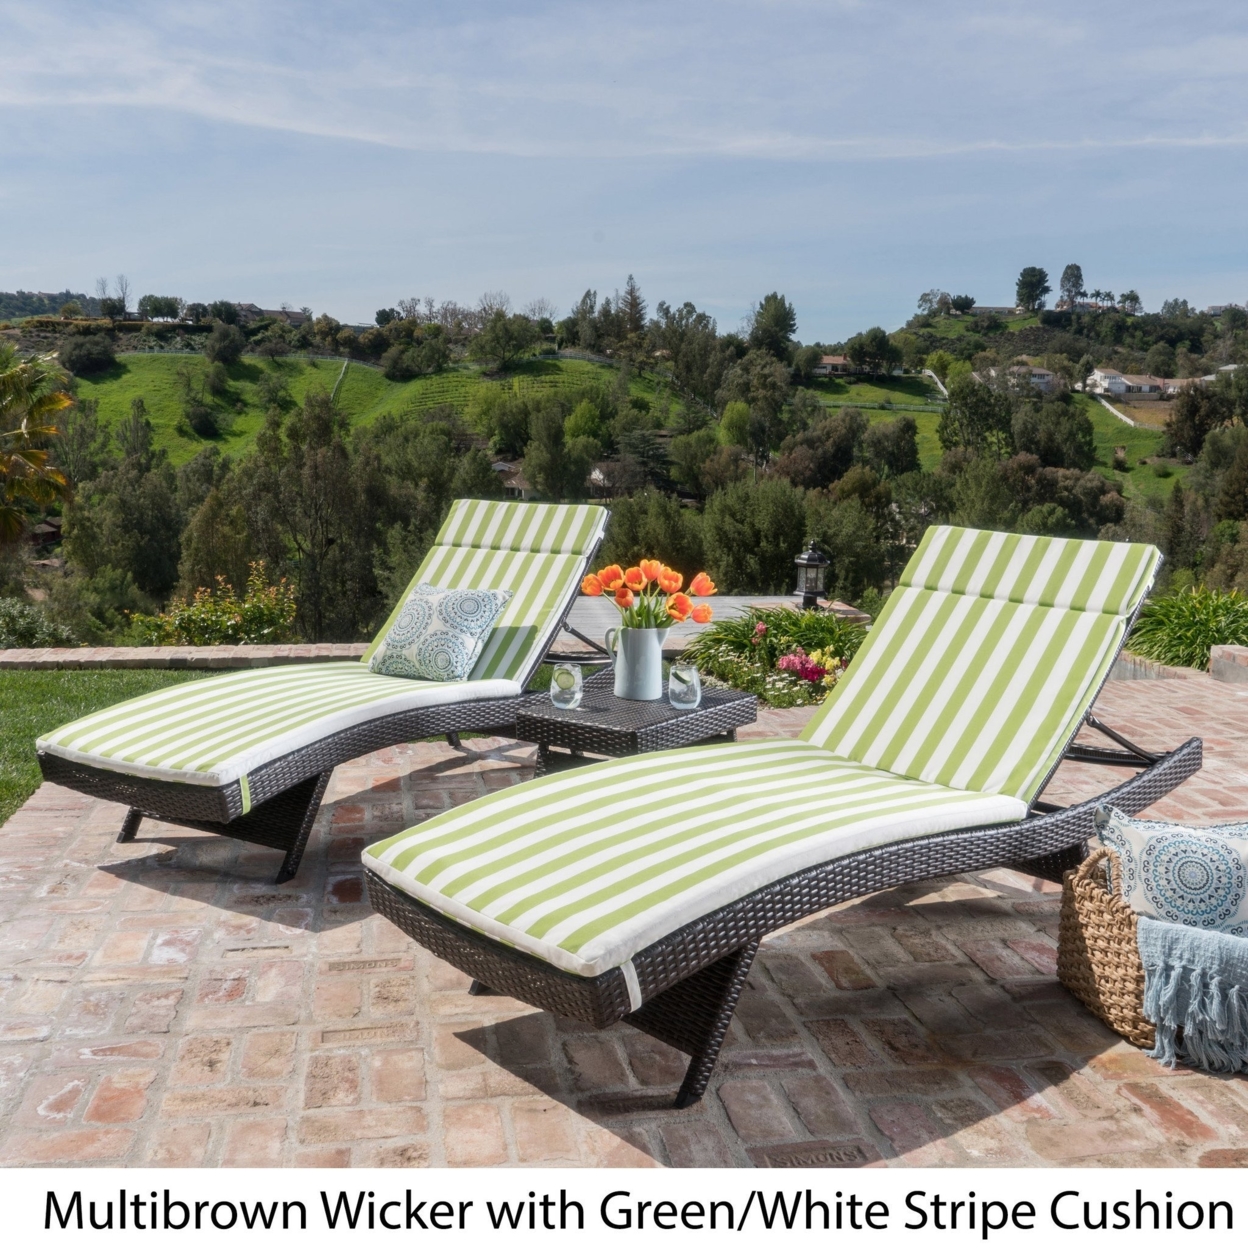 Lakeport 3pc Outdoor Wicker Chaise Lounge Chair & Table Set With Cushions - Green/white Cushion, Brown